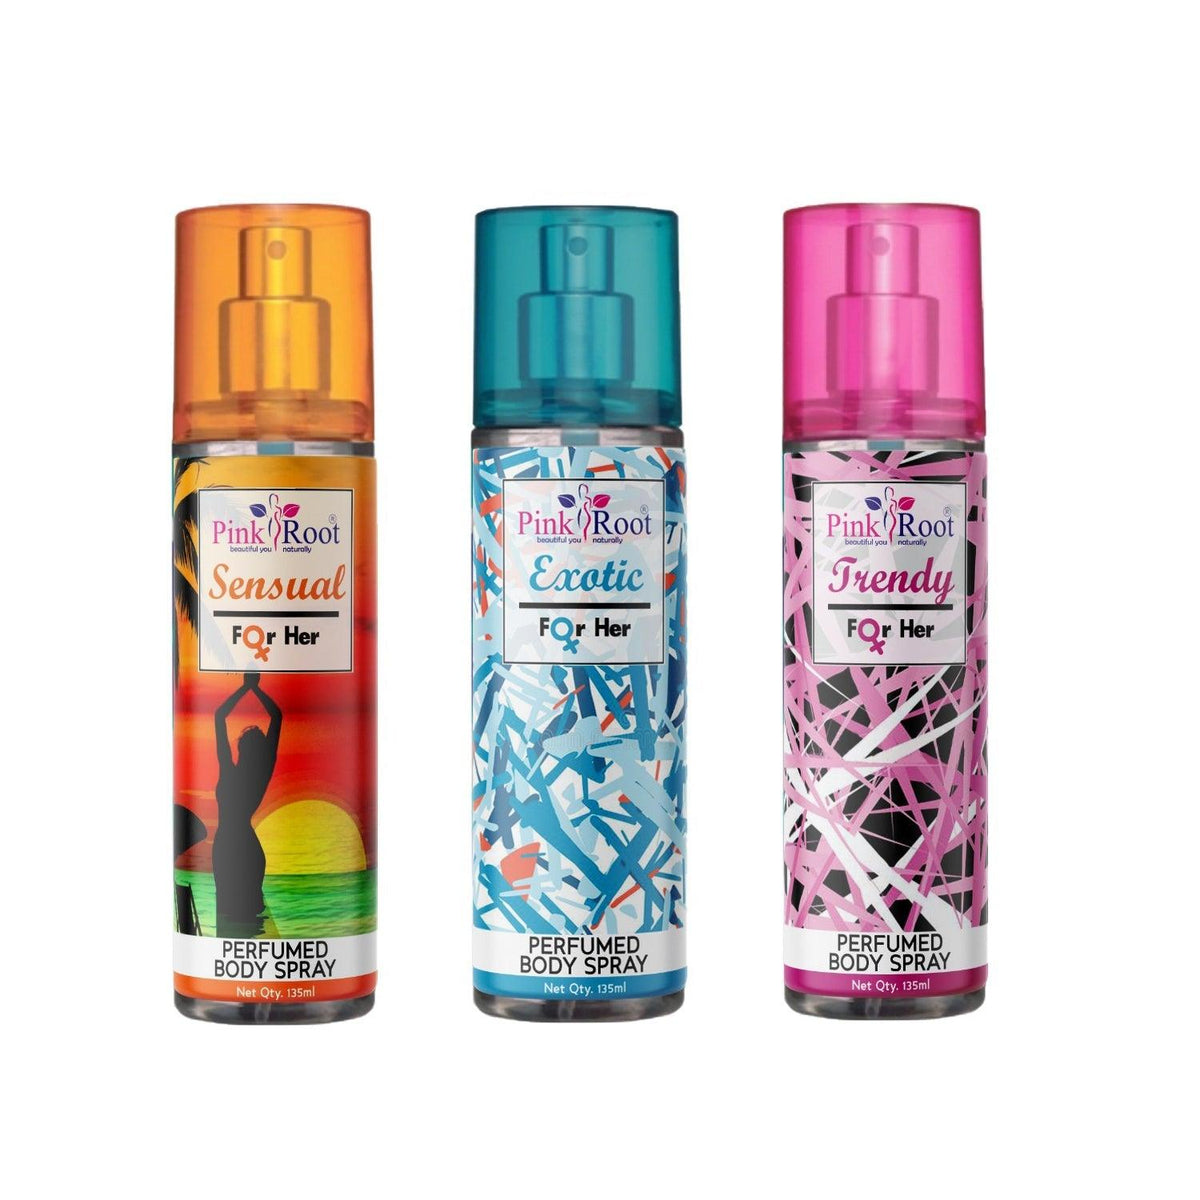 Sensual, Exotic & Trendy Perfumed Body Spray for Women, Pack of 3 - Pink Root